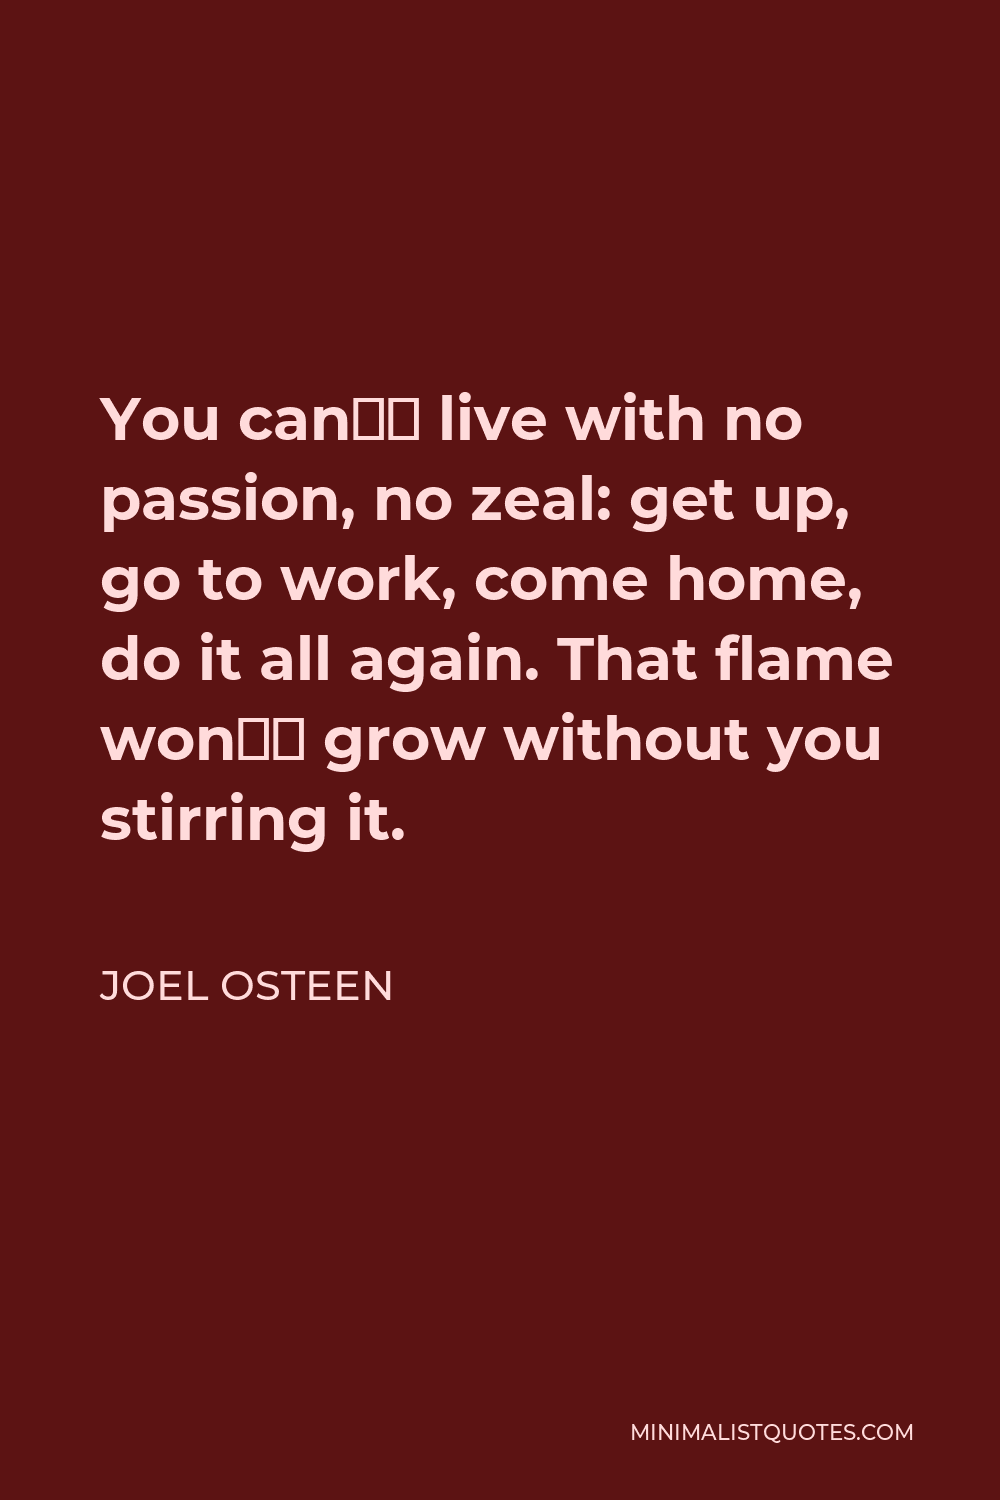 Joel Osteen Quote - You can’t live with no passion, no zeal: get up, go to work, come home, do it all again. That flame won’t grow without you stirring it.